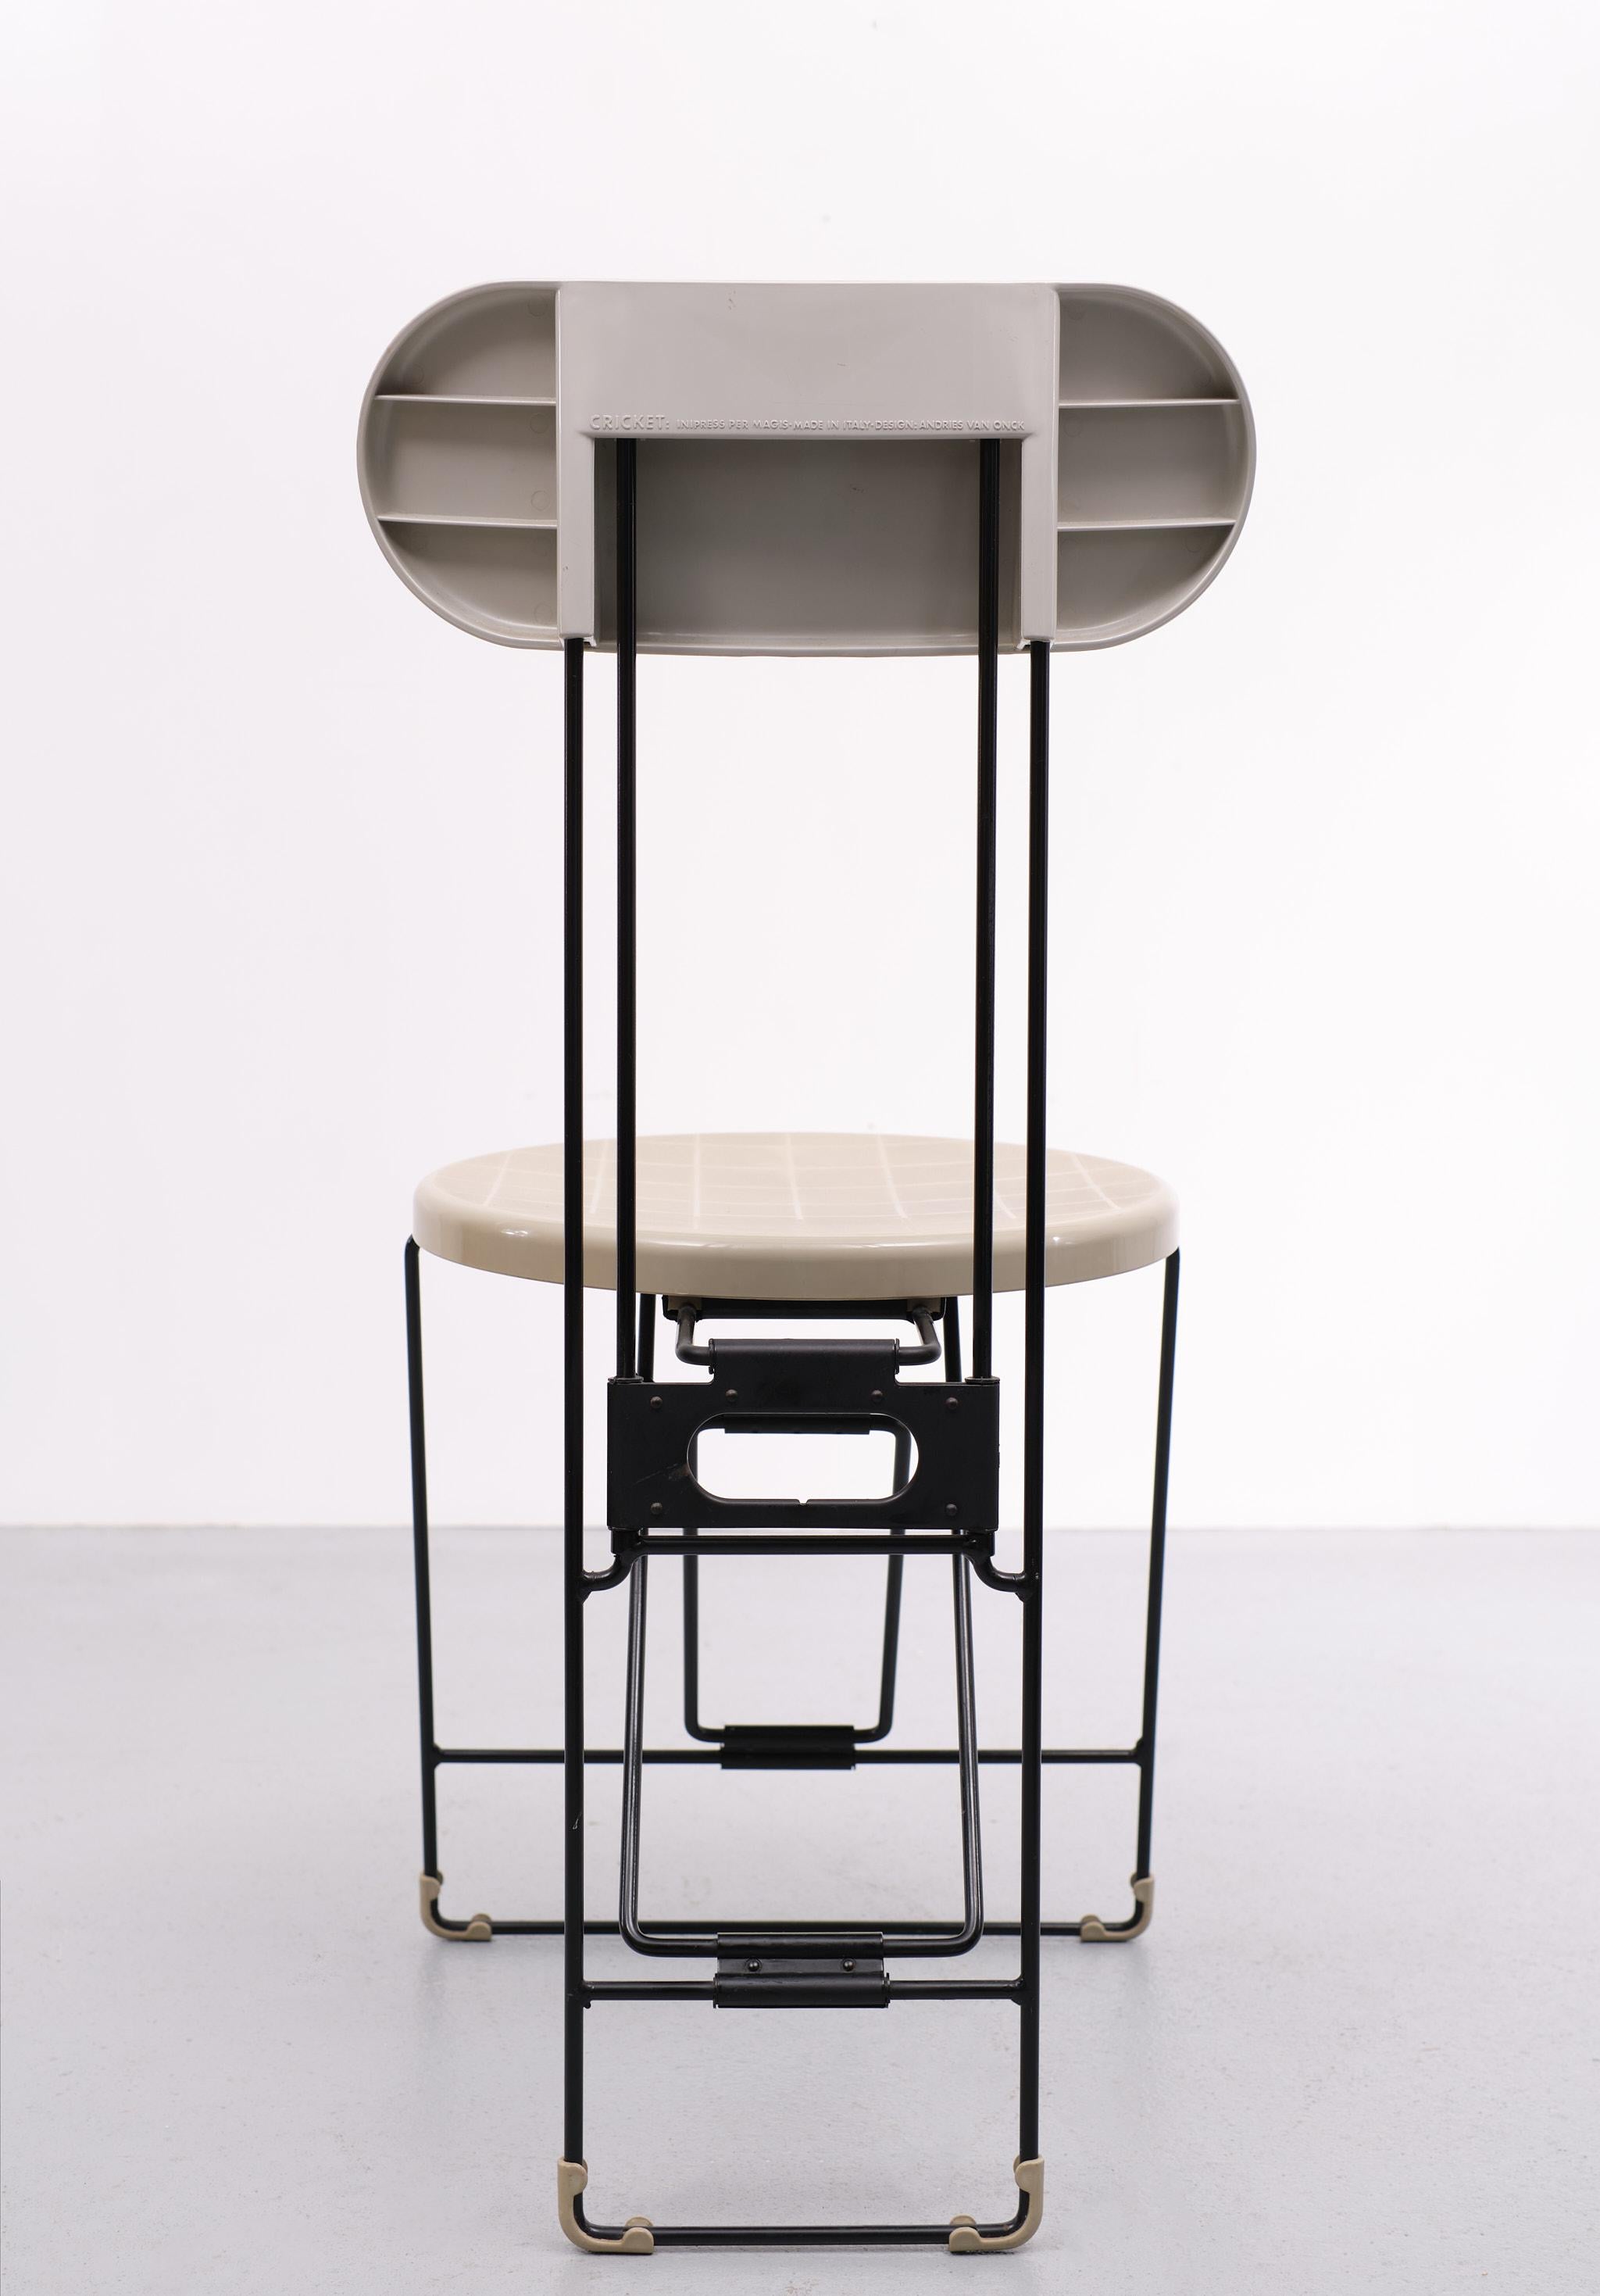 Cricket folding chair designed by Andries Van Onck, produced by Magis Italia, 1983
Andries van Onck in collaboration with Kazuma Yamaguchi.
The Cricket folding chair was born of the idea to bring together simple geometric figures (a circle, a